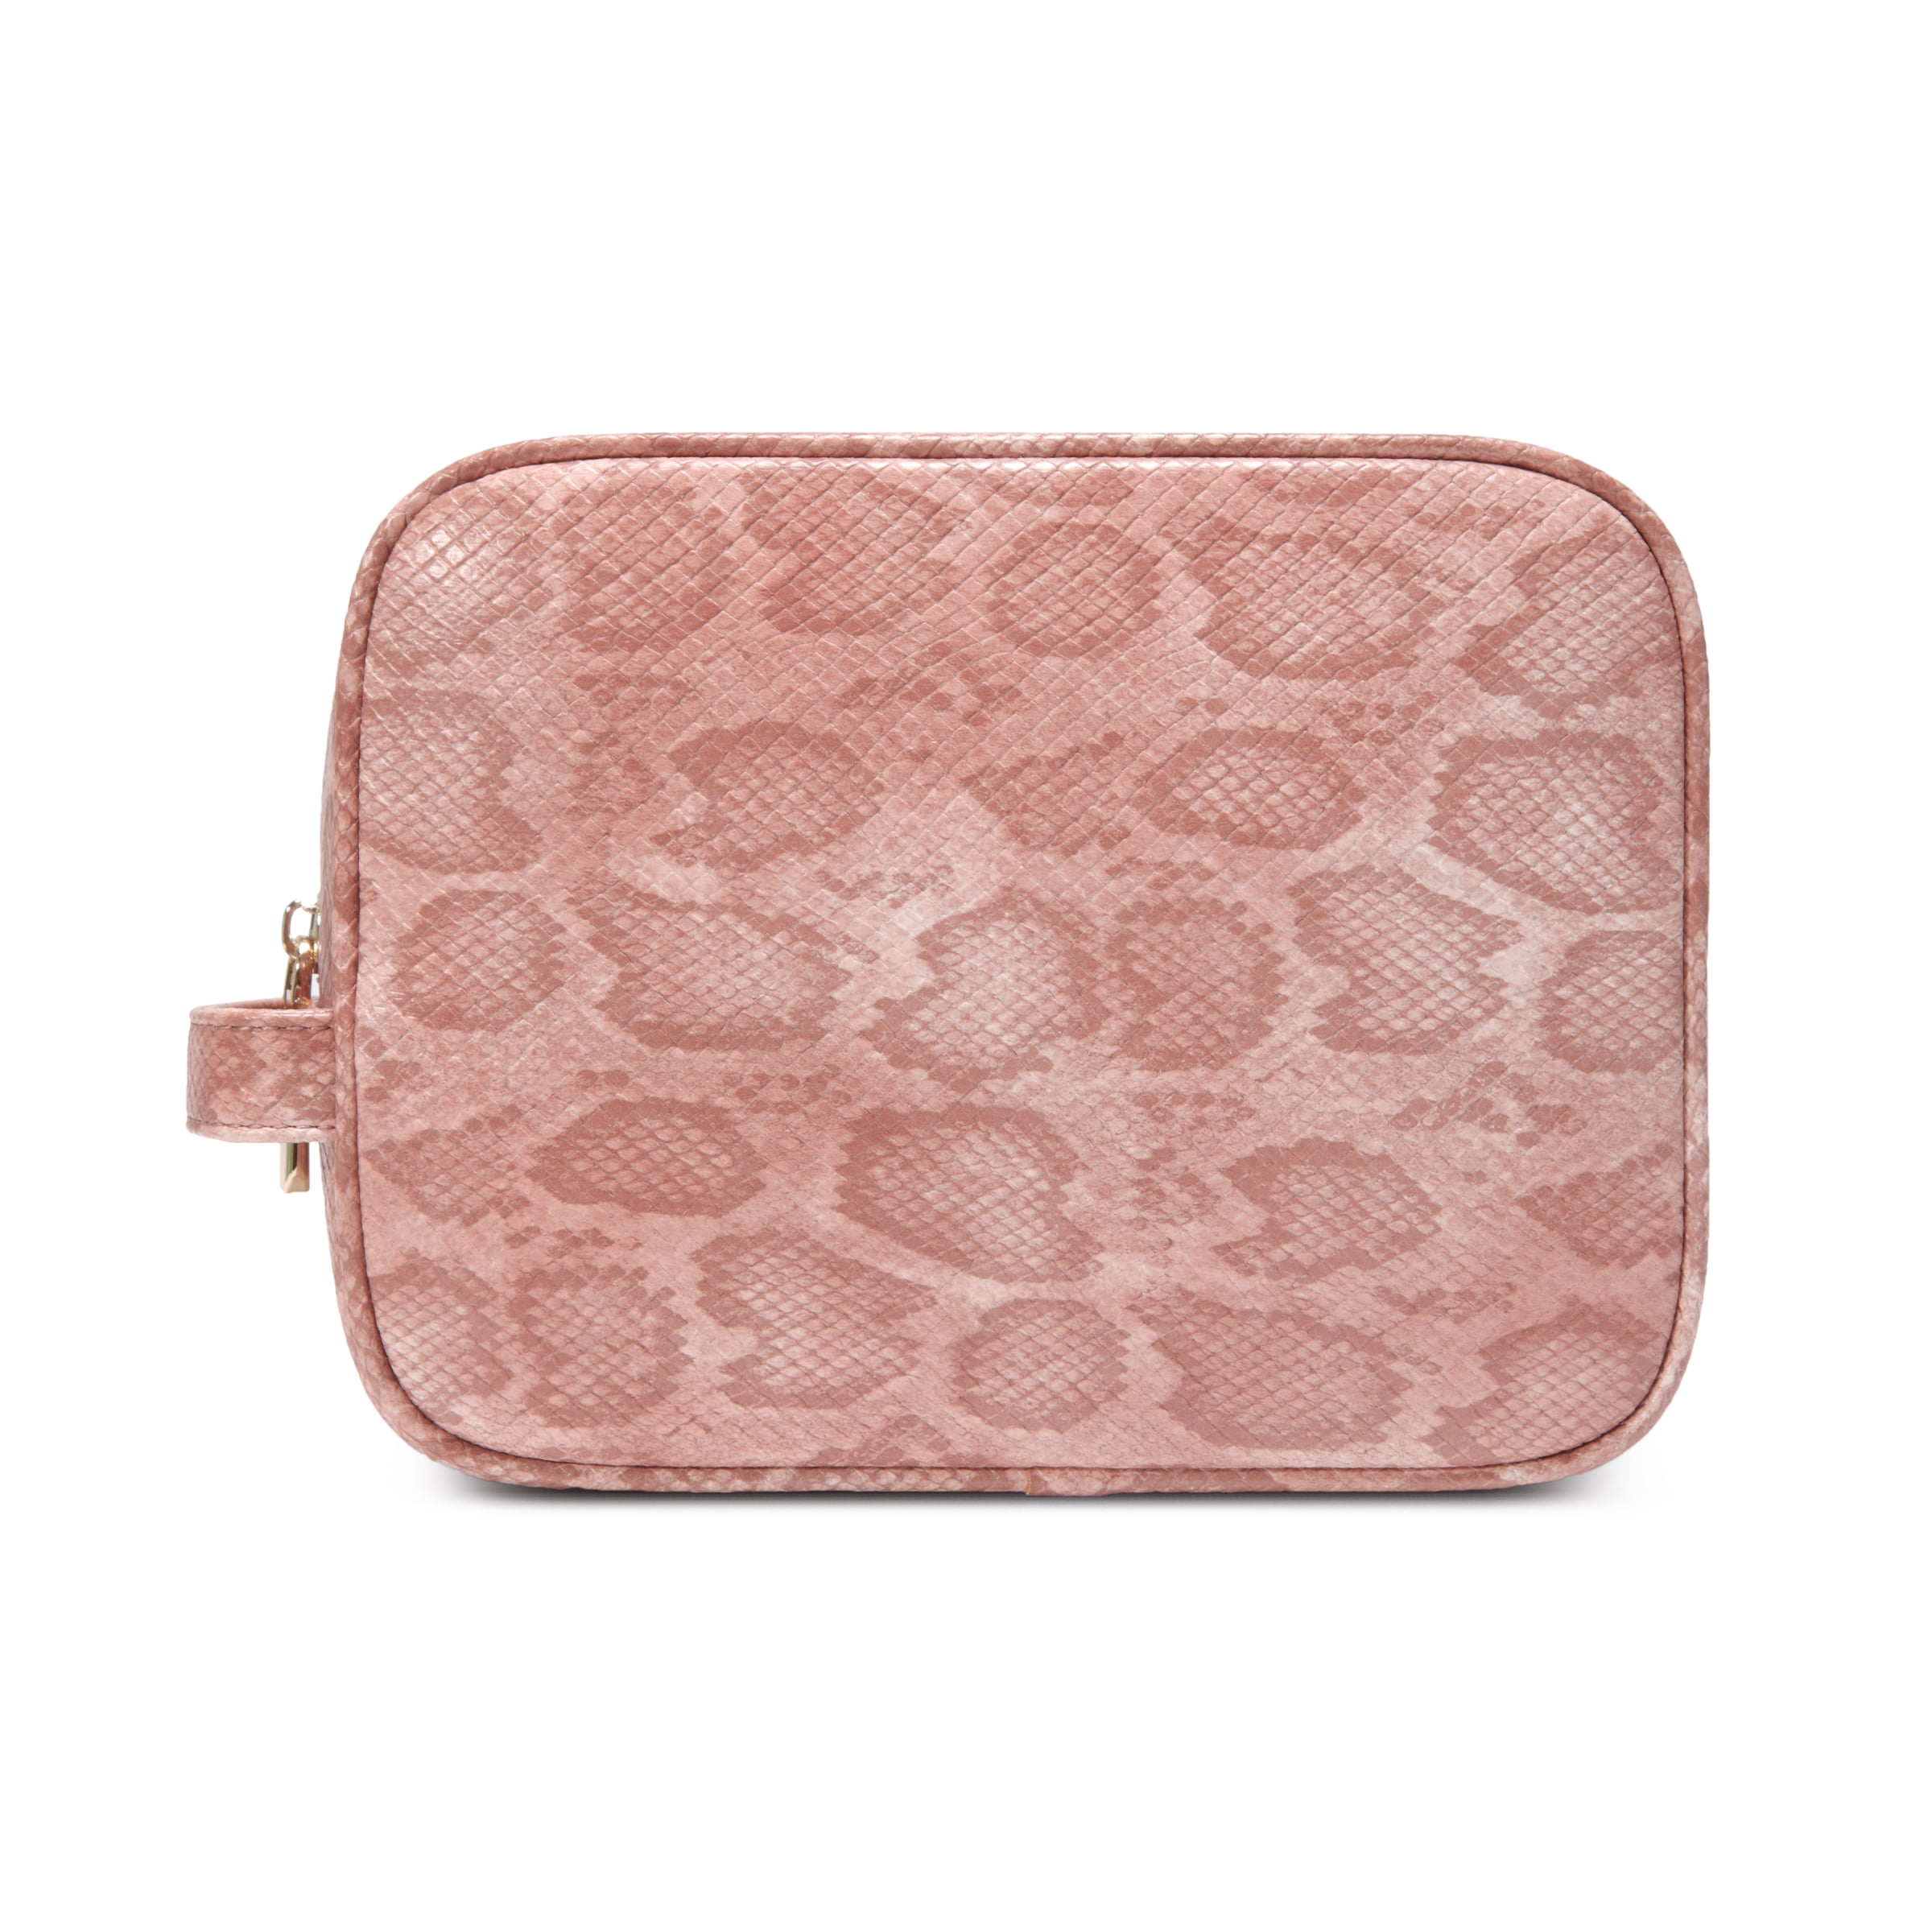 Daisy Rose - Daisy Rose Cosmetic toiletry bag | PU Vegan Leather Travel bag - Pink Snake ...